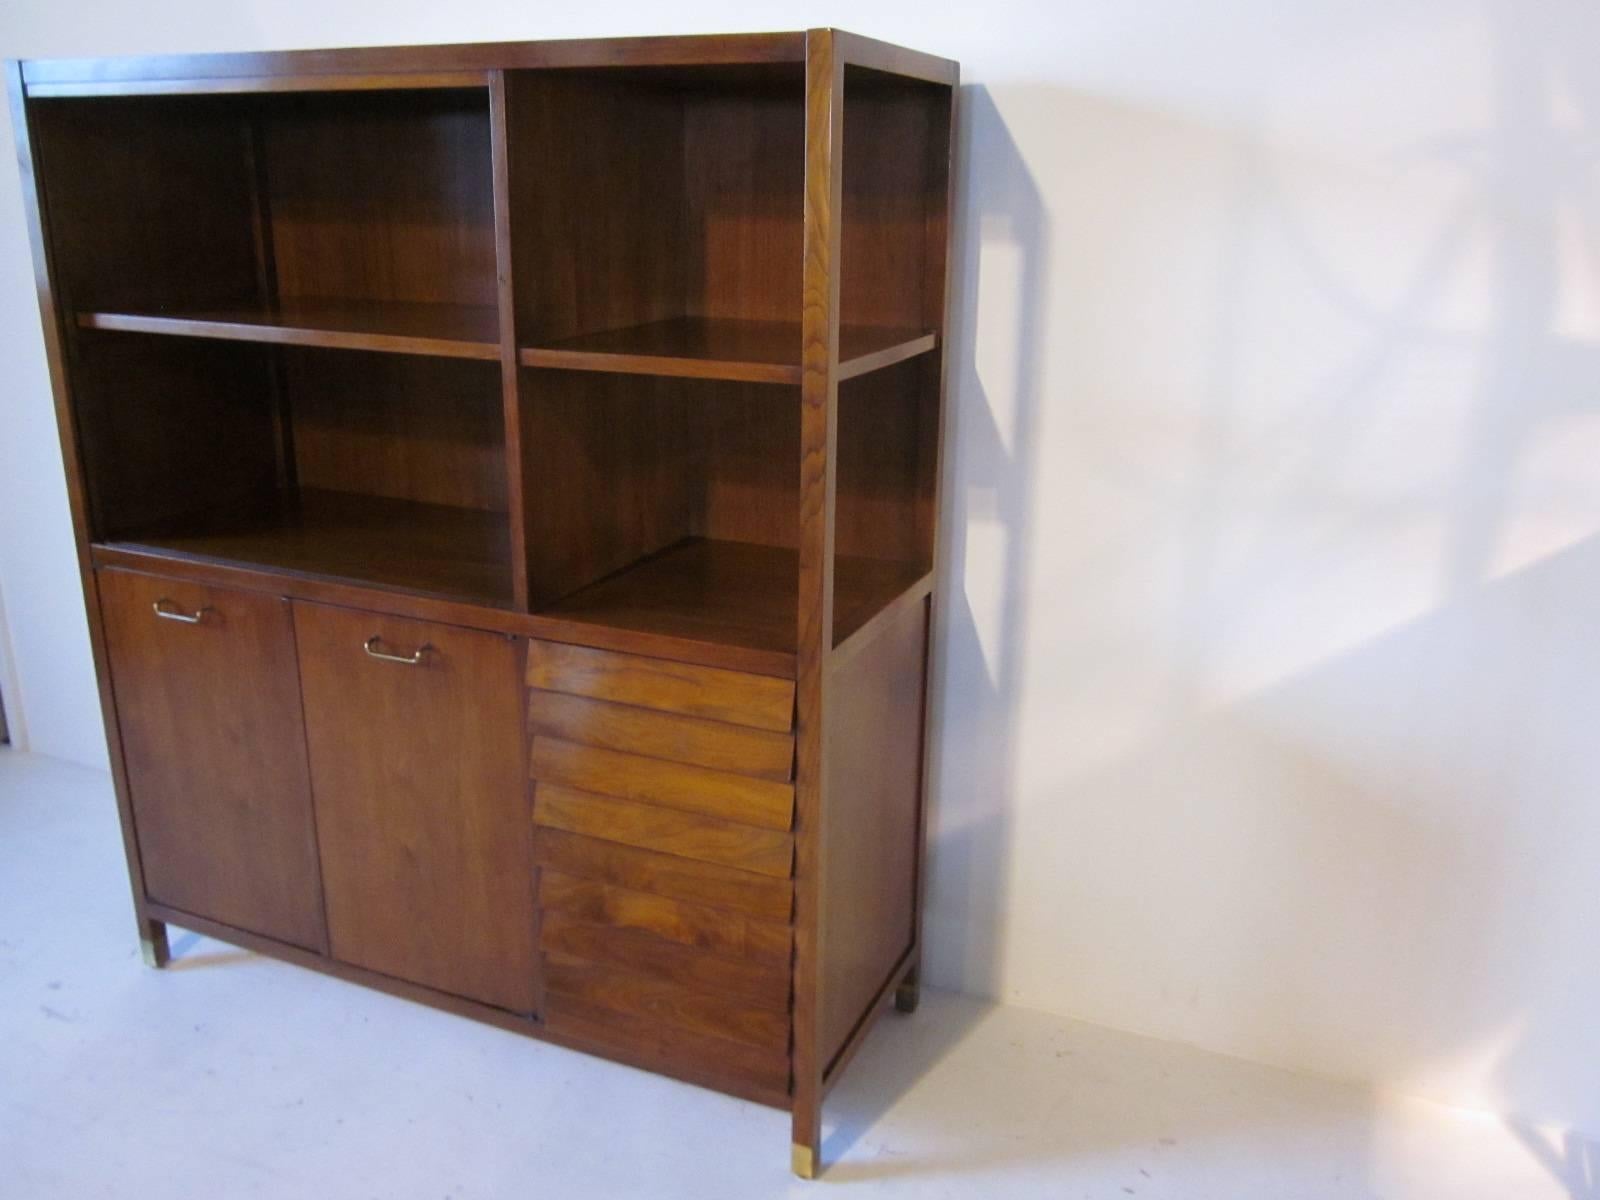 A tall hutch with credenza base, two doors and shelve for storage and four drawers, open top shelves that can be used for a bookcase, china hutch or the entertainment area. Brass pulls and leg caps with angled front drawers complement this one piece